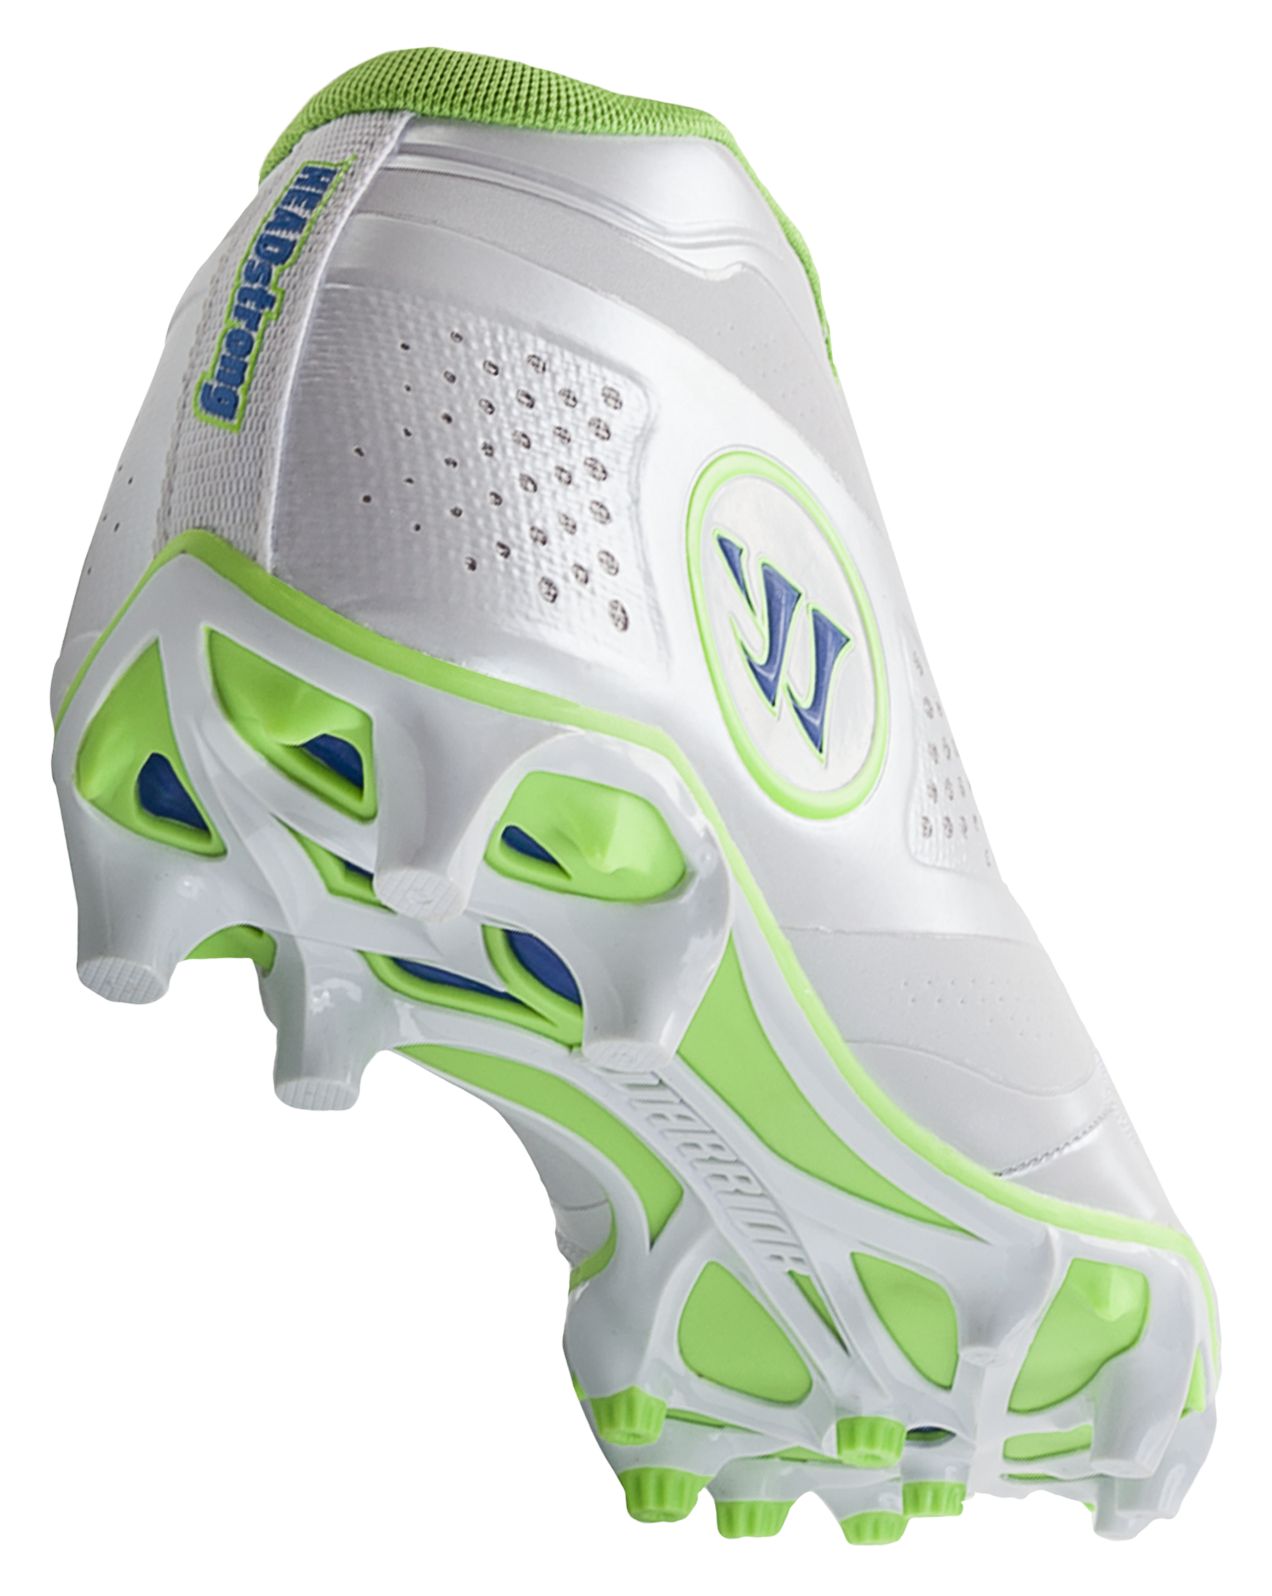 Burn 7.0 Headstrong Mid Cleat, White with Neon Green & Neon Blue image number 2